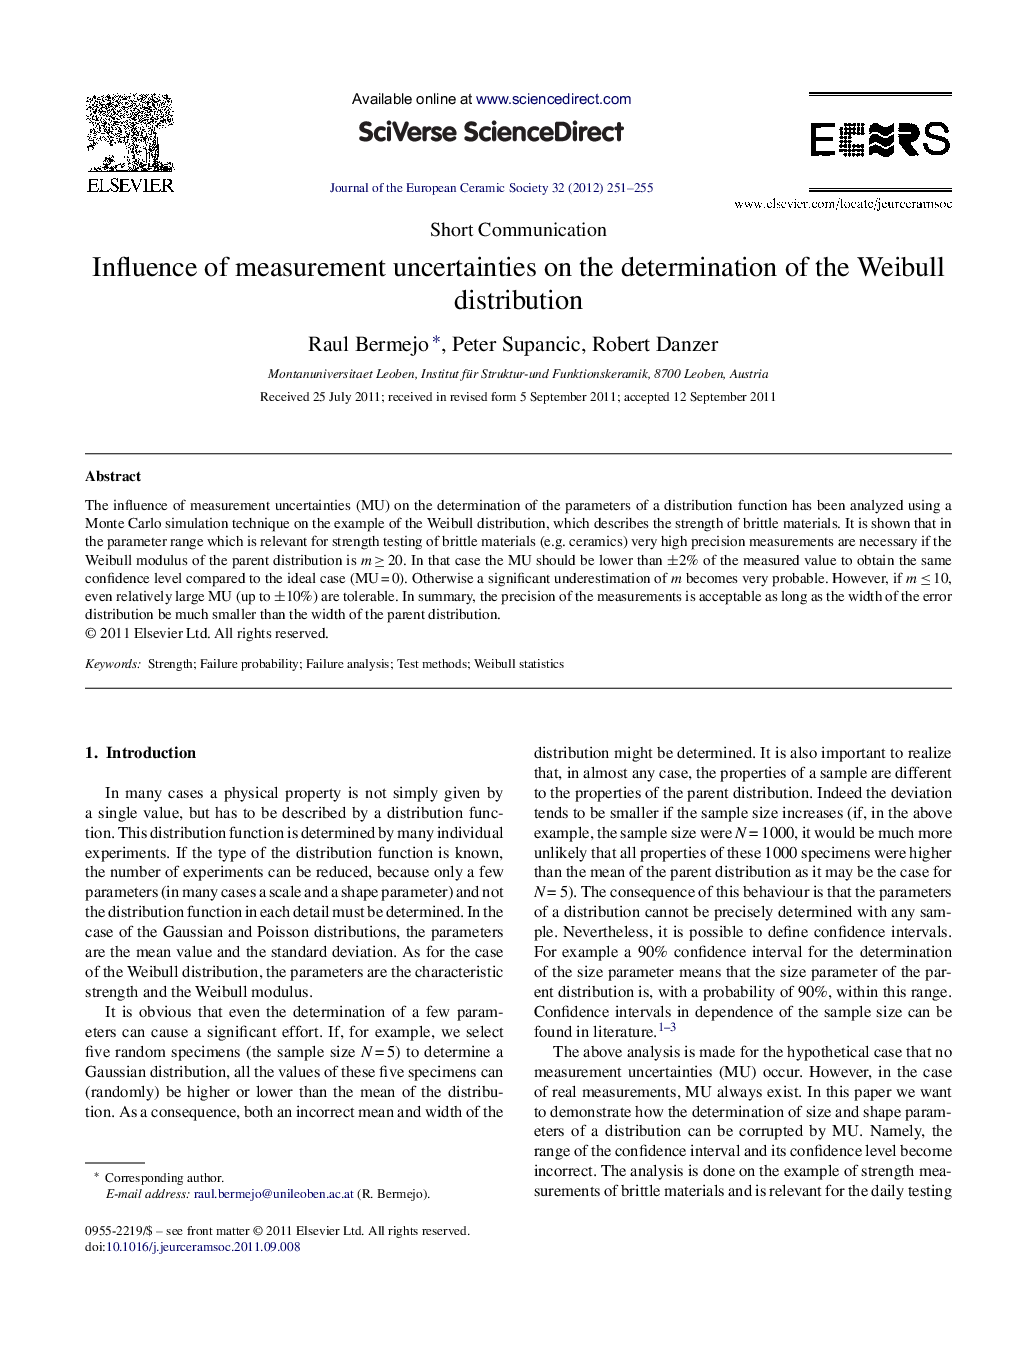 Influence of measurement uncertainties on the determination of the Weibull distribution